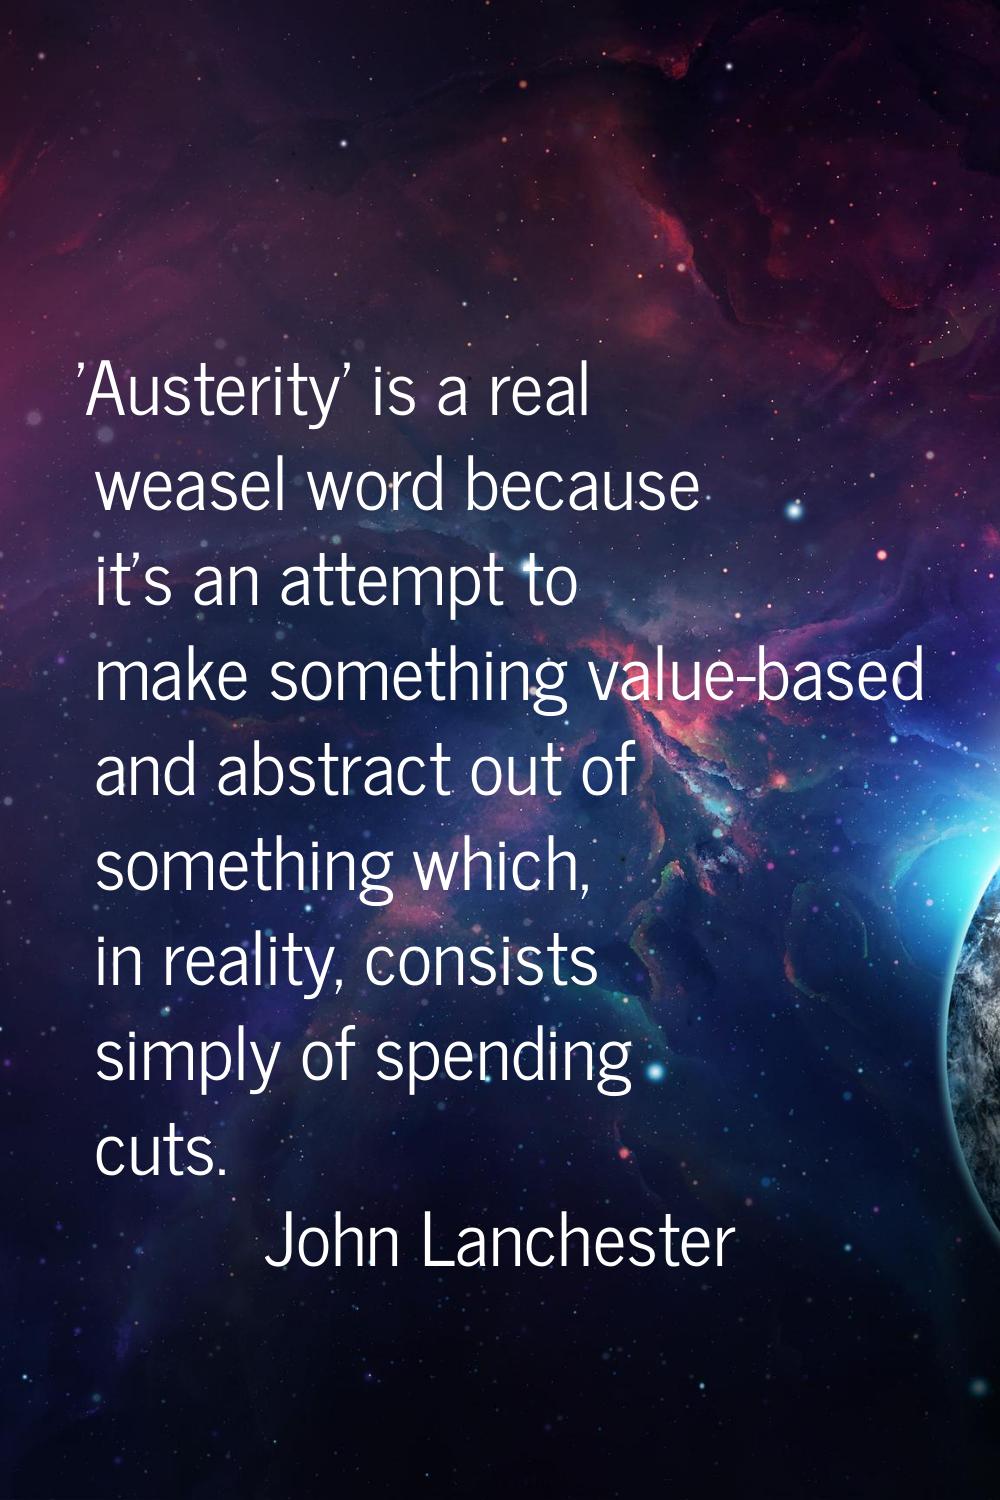 'Austerity' is a real weasel word because it's an attempt to make something value-based and abstrac